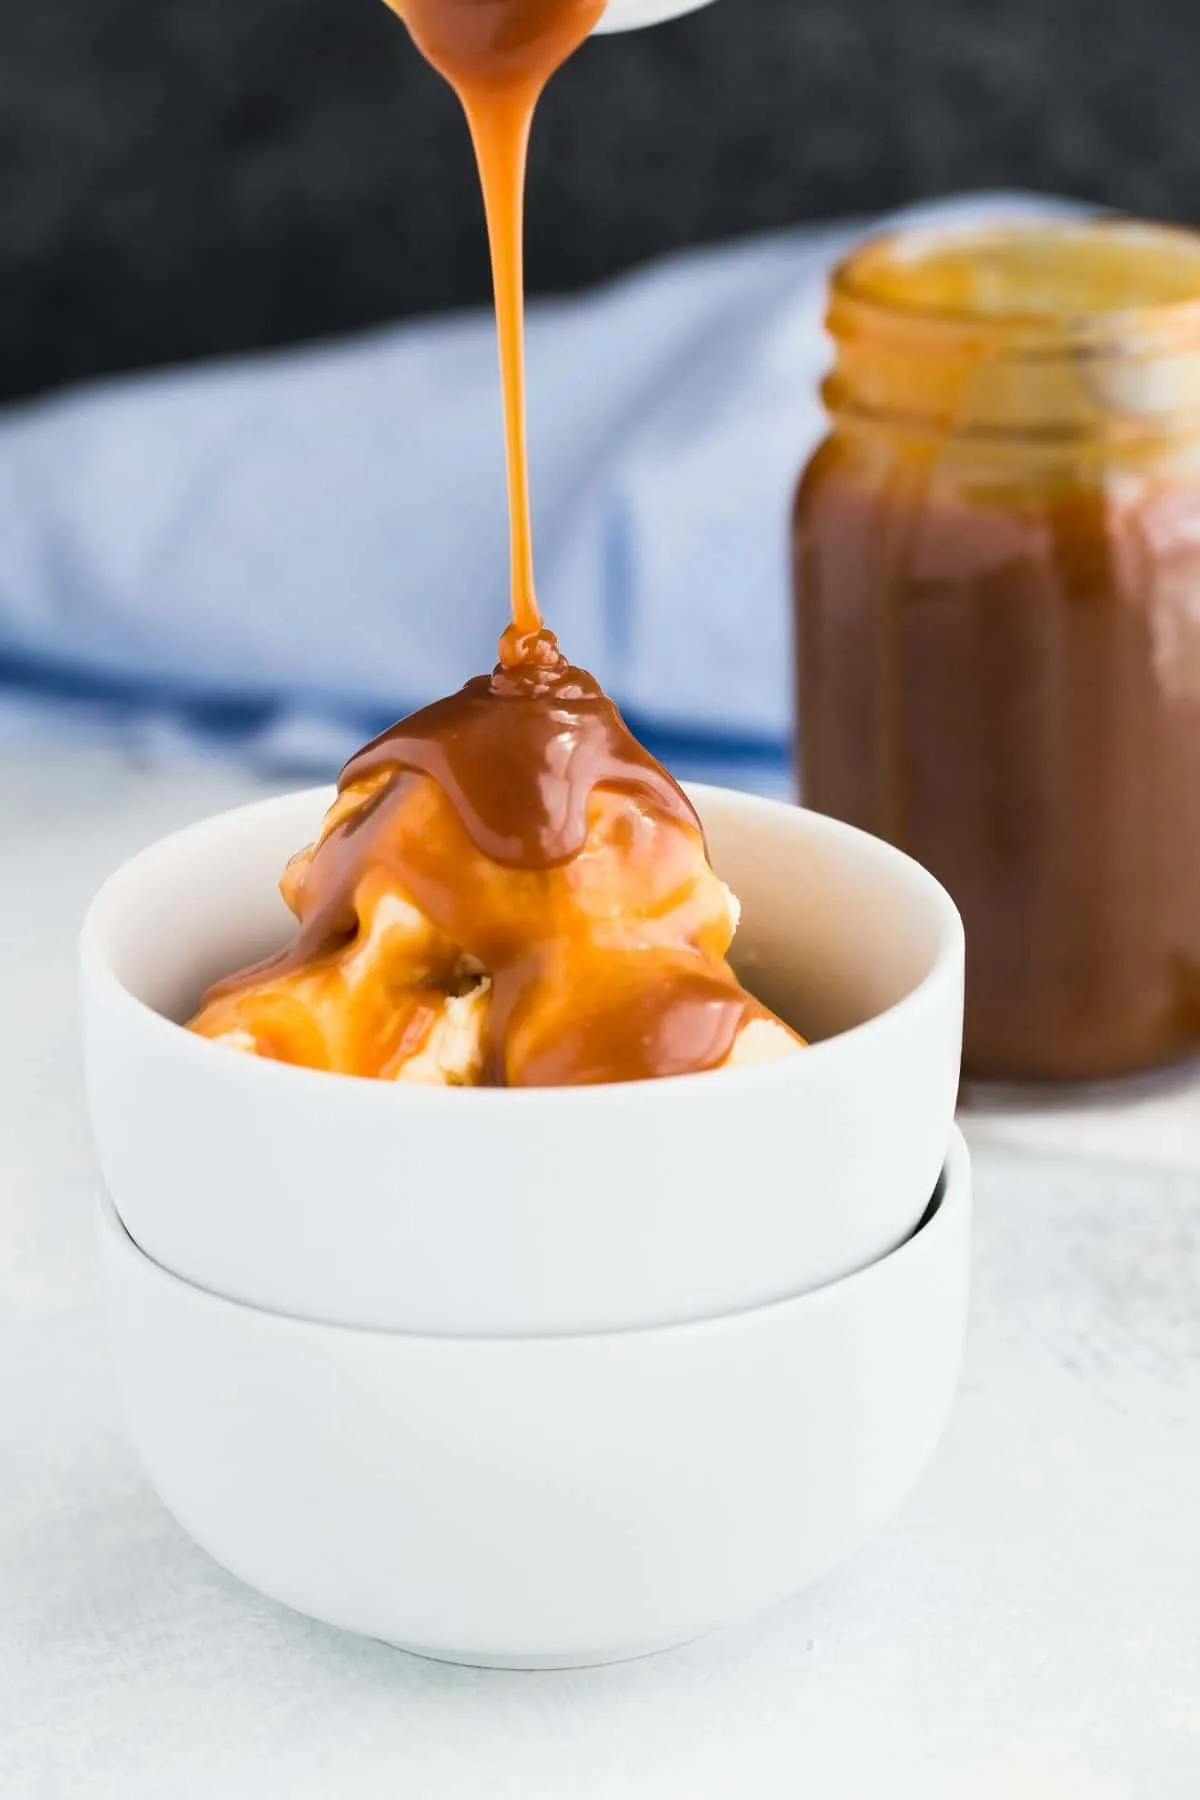 Homemade caramel sauce bring drizzled over a scoop of ice cream in a white bowl.